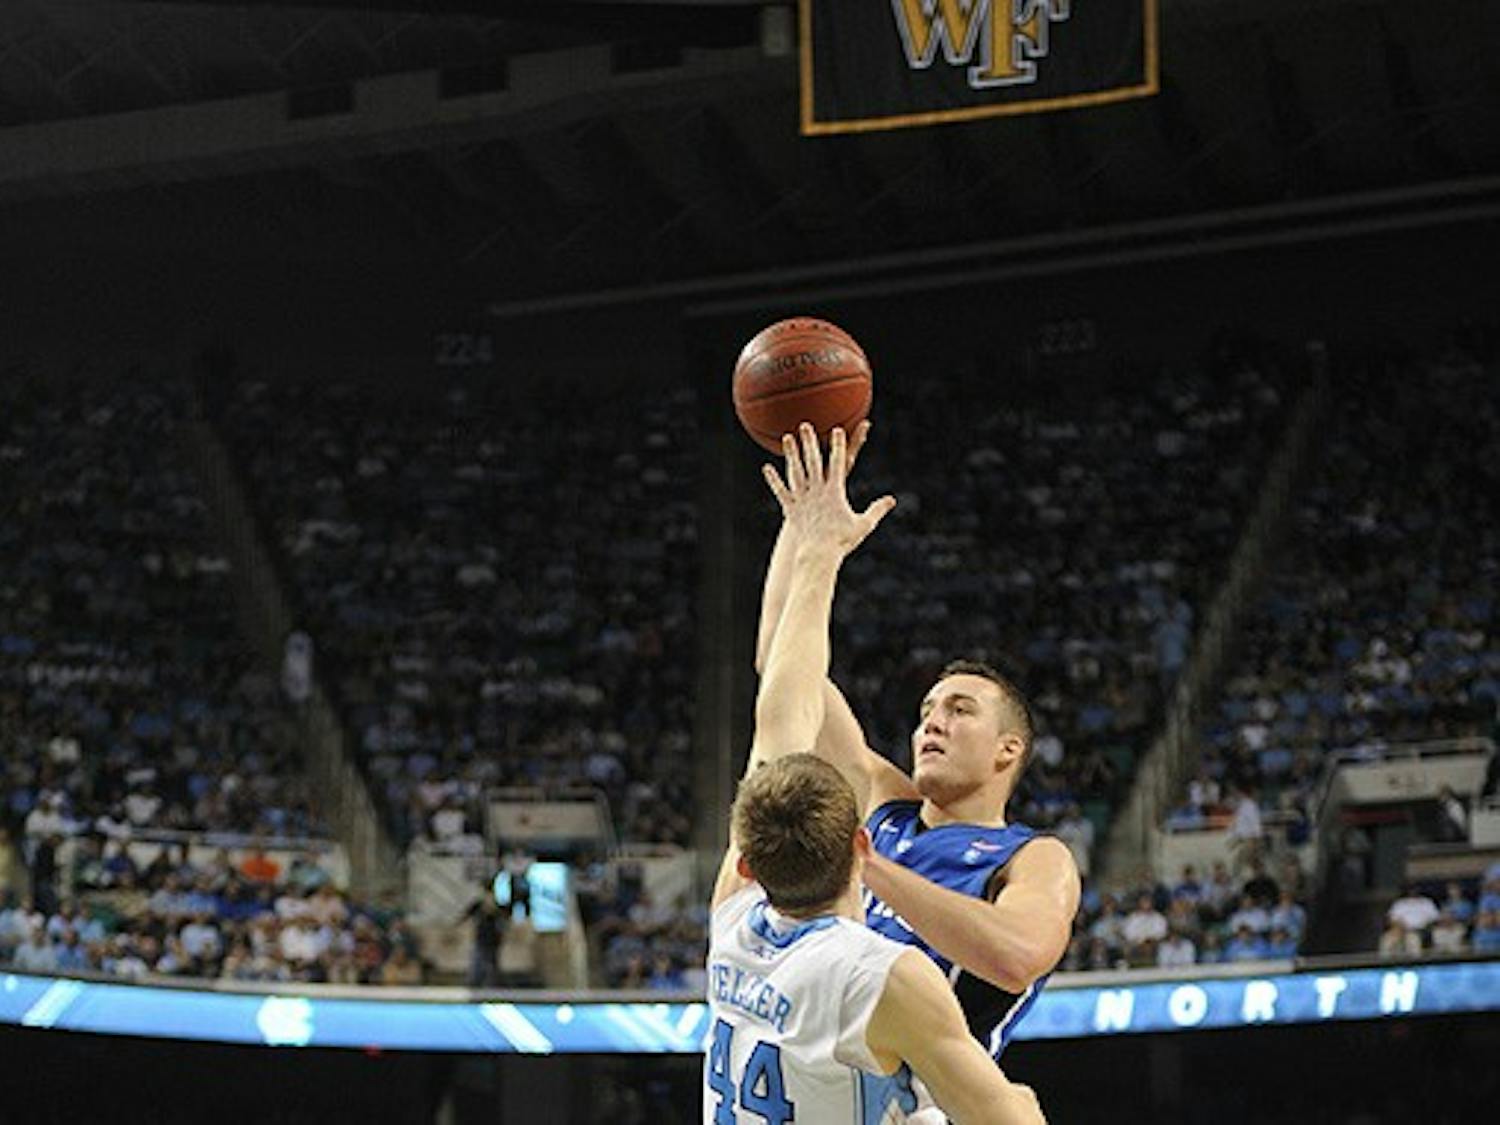 In three games at the ACC tournament, Miles Plumlee took advantage of a starting role, scoring 8.7 points and grabbing 6.7 rebounds per game.